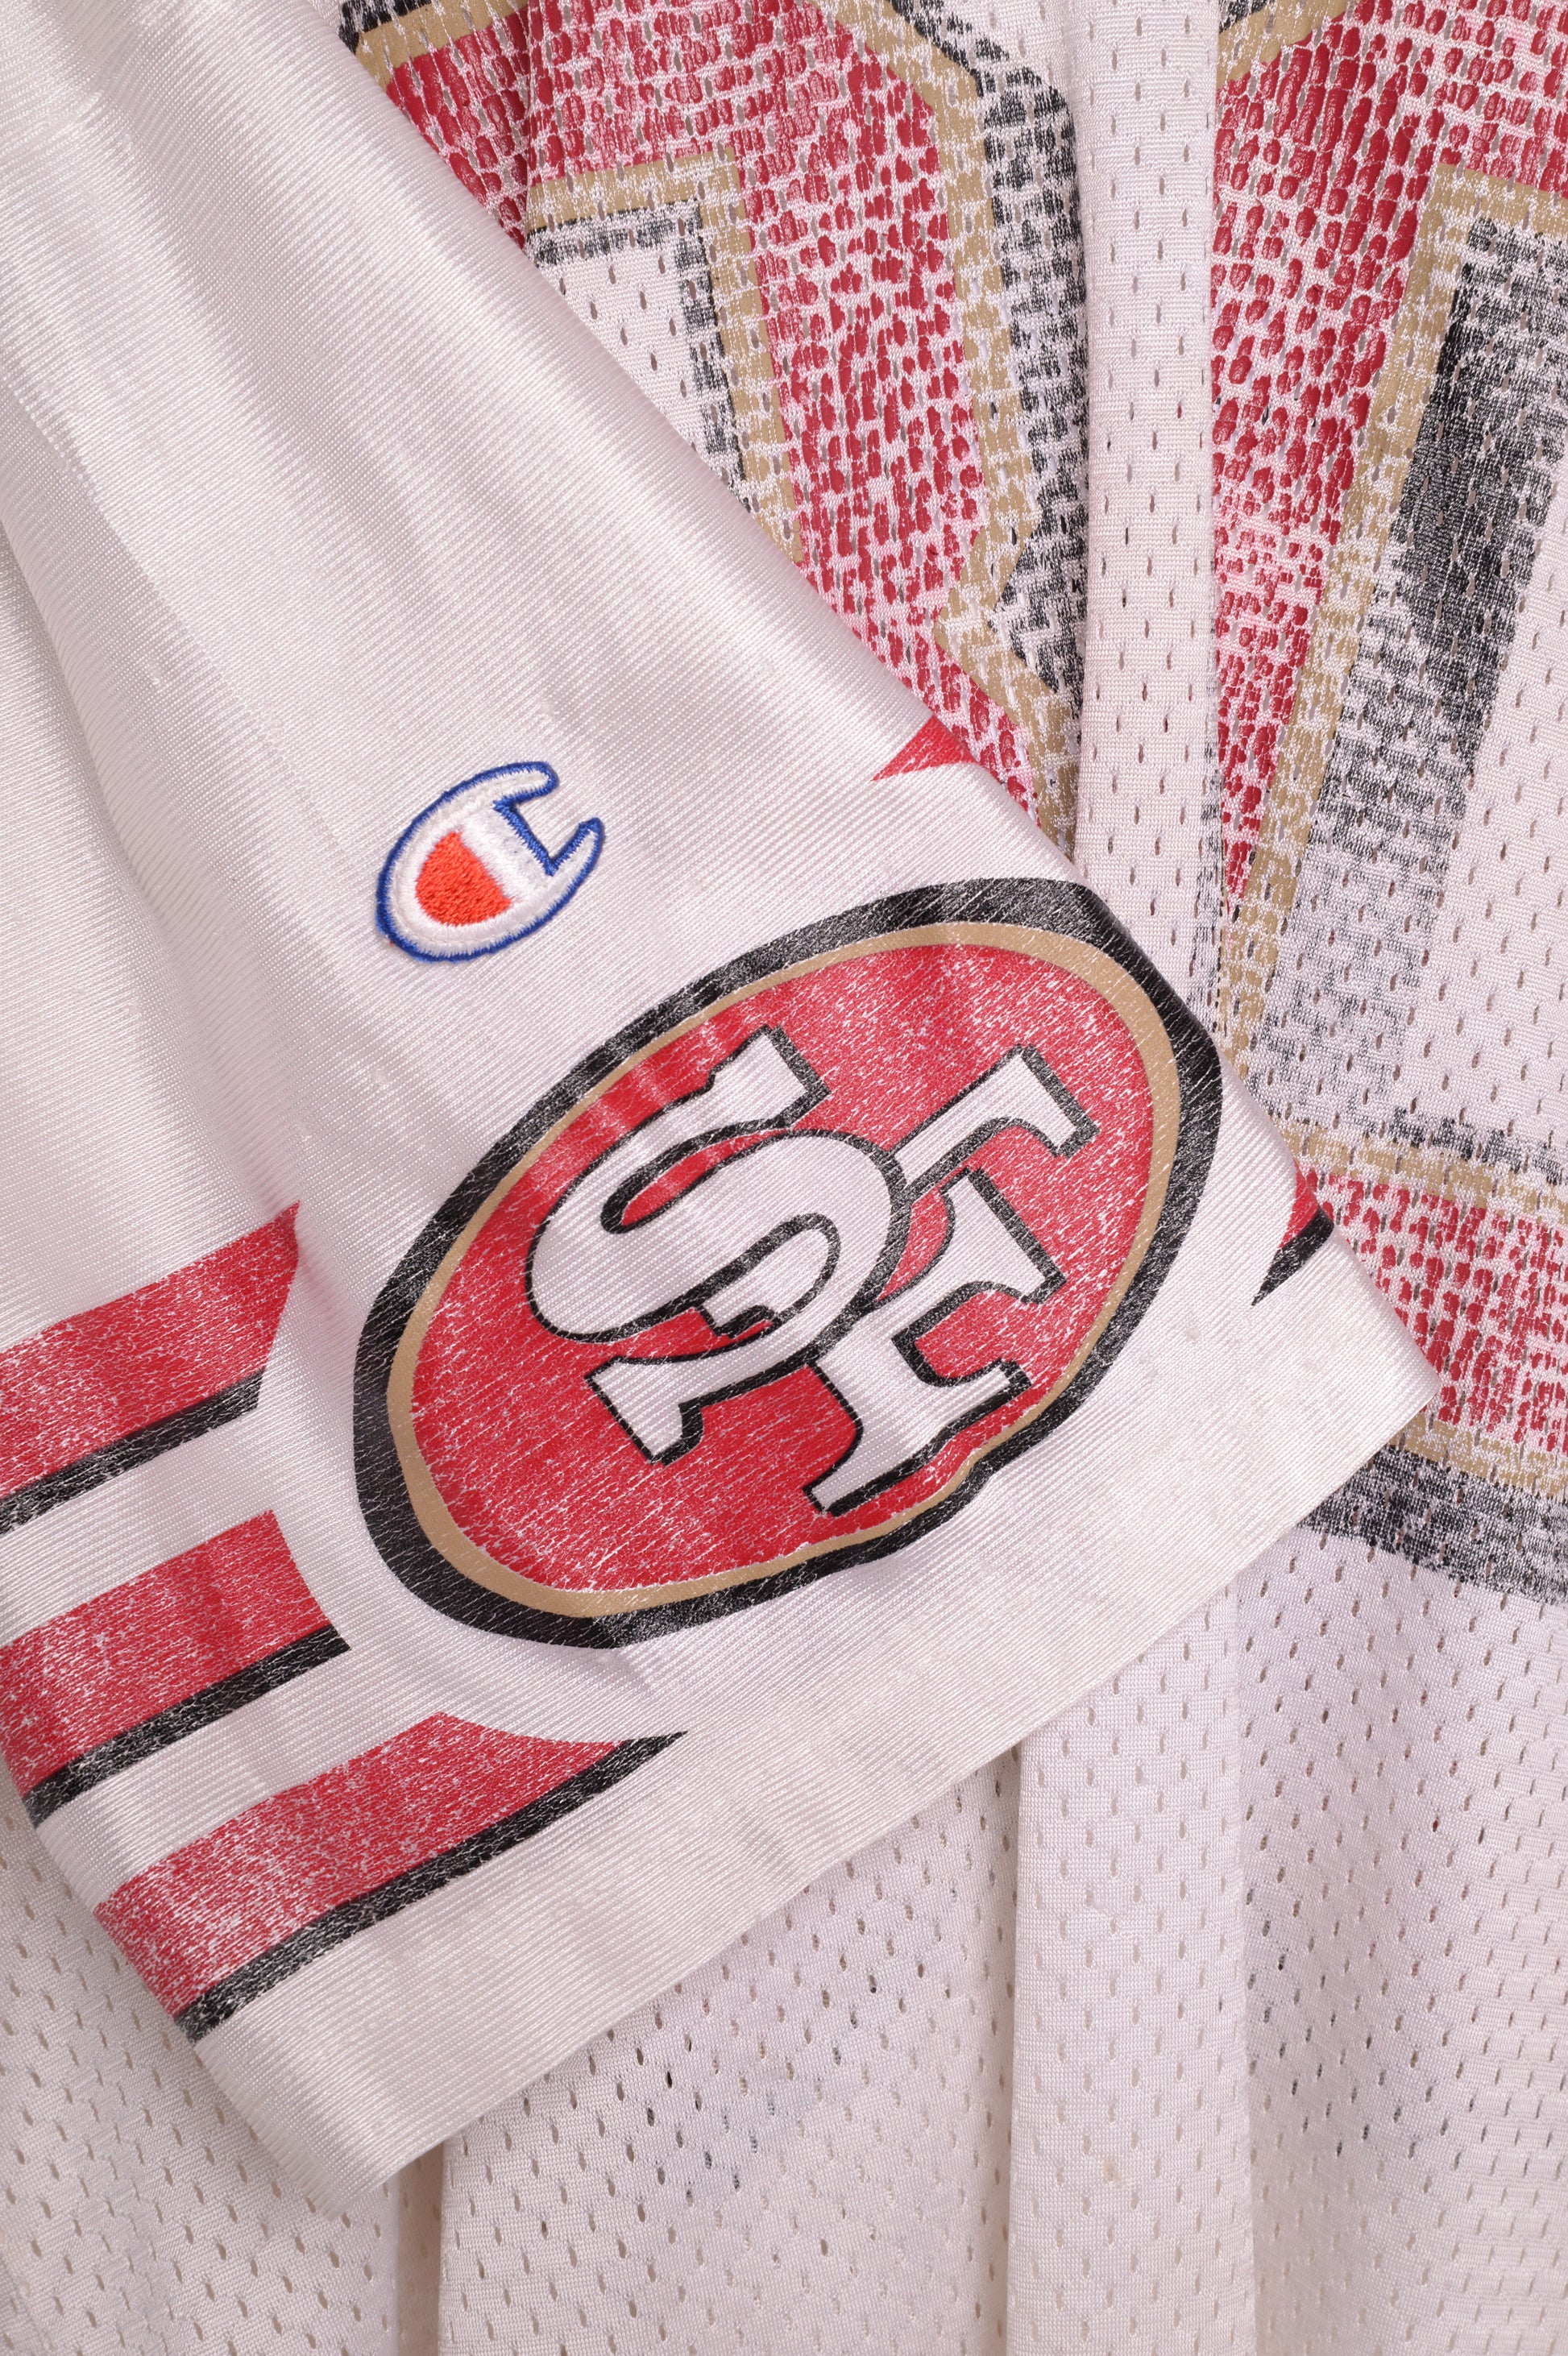 49ers jersey